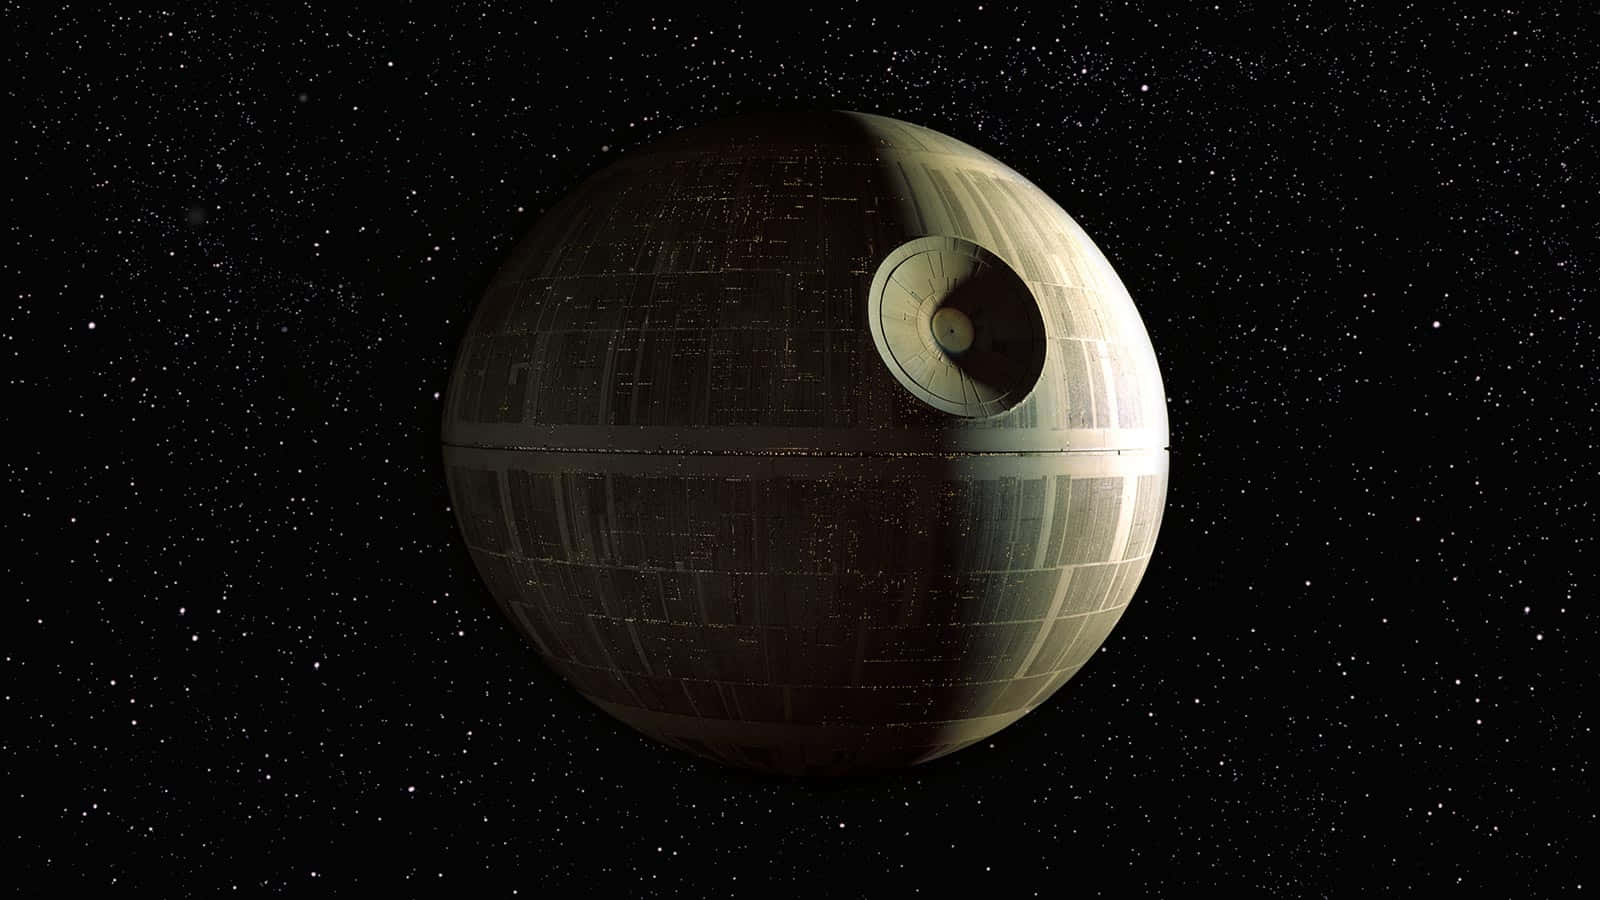 The Death Star - the ultimate weapon of the Empire